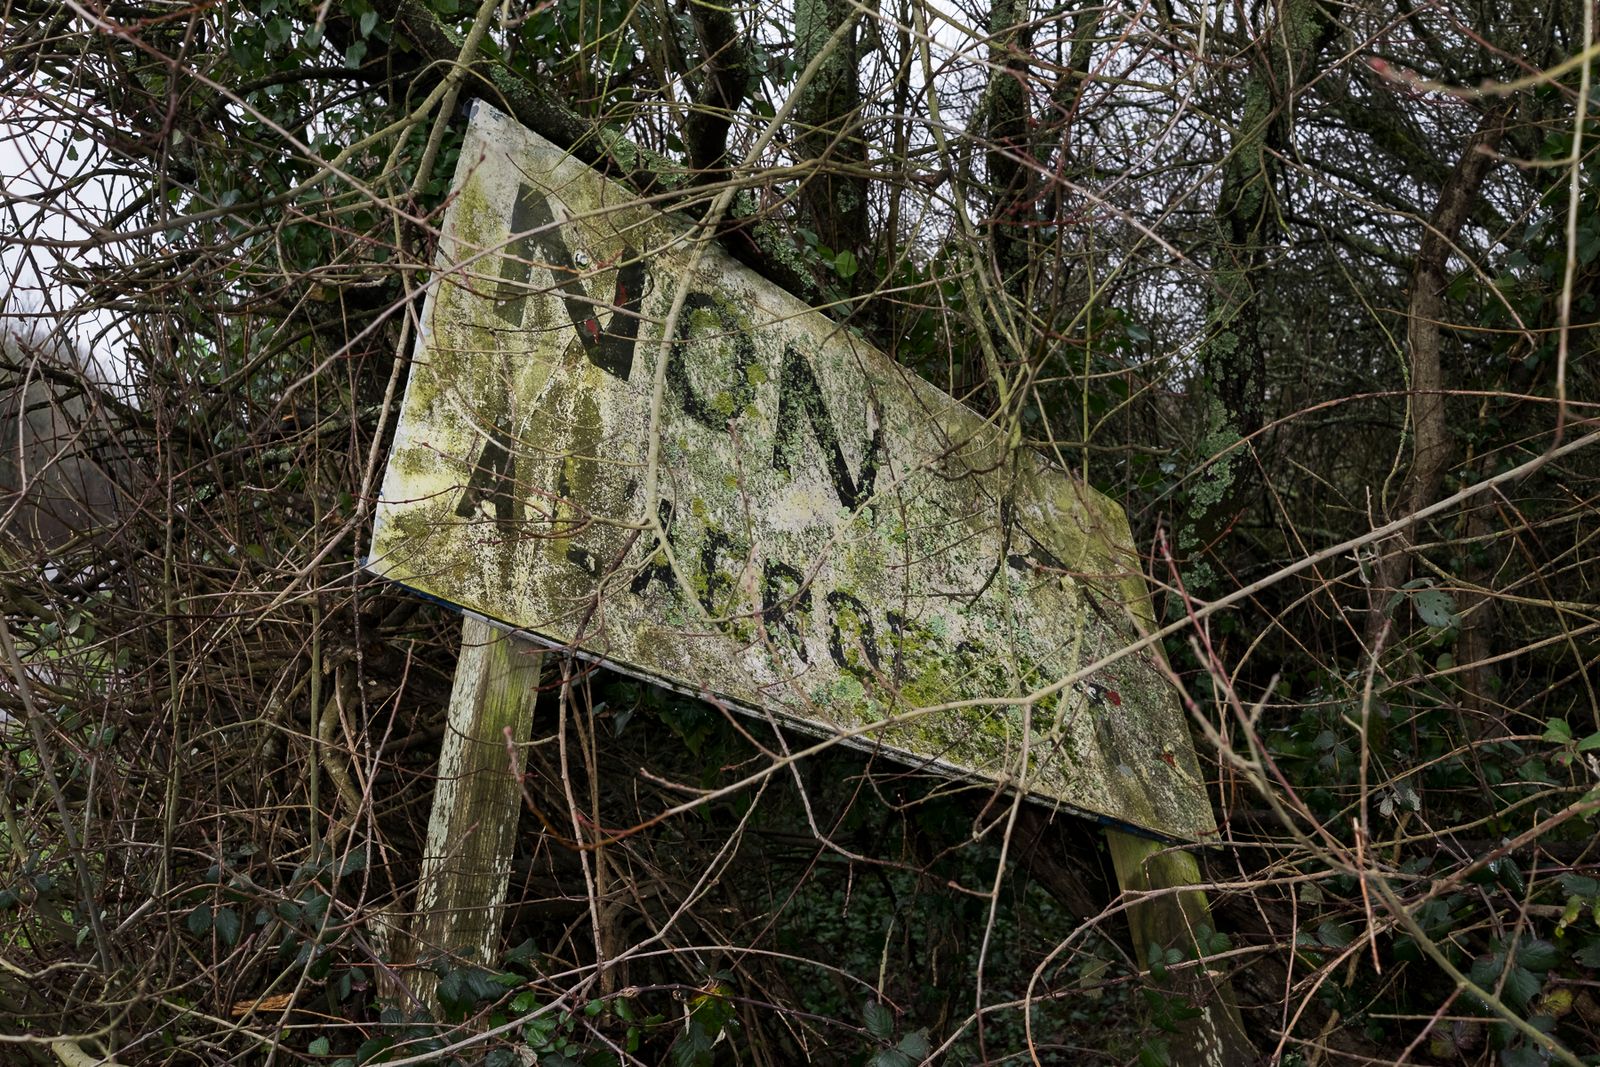 © Penelope Thomaidi - An old sign along the road reads “NO A L’ AEROPORT” (No to the Aeroprt). Notre Dame de Landes, France, January, 2018.